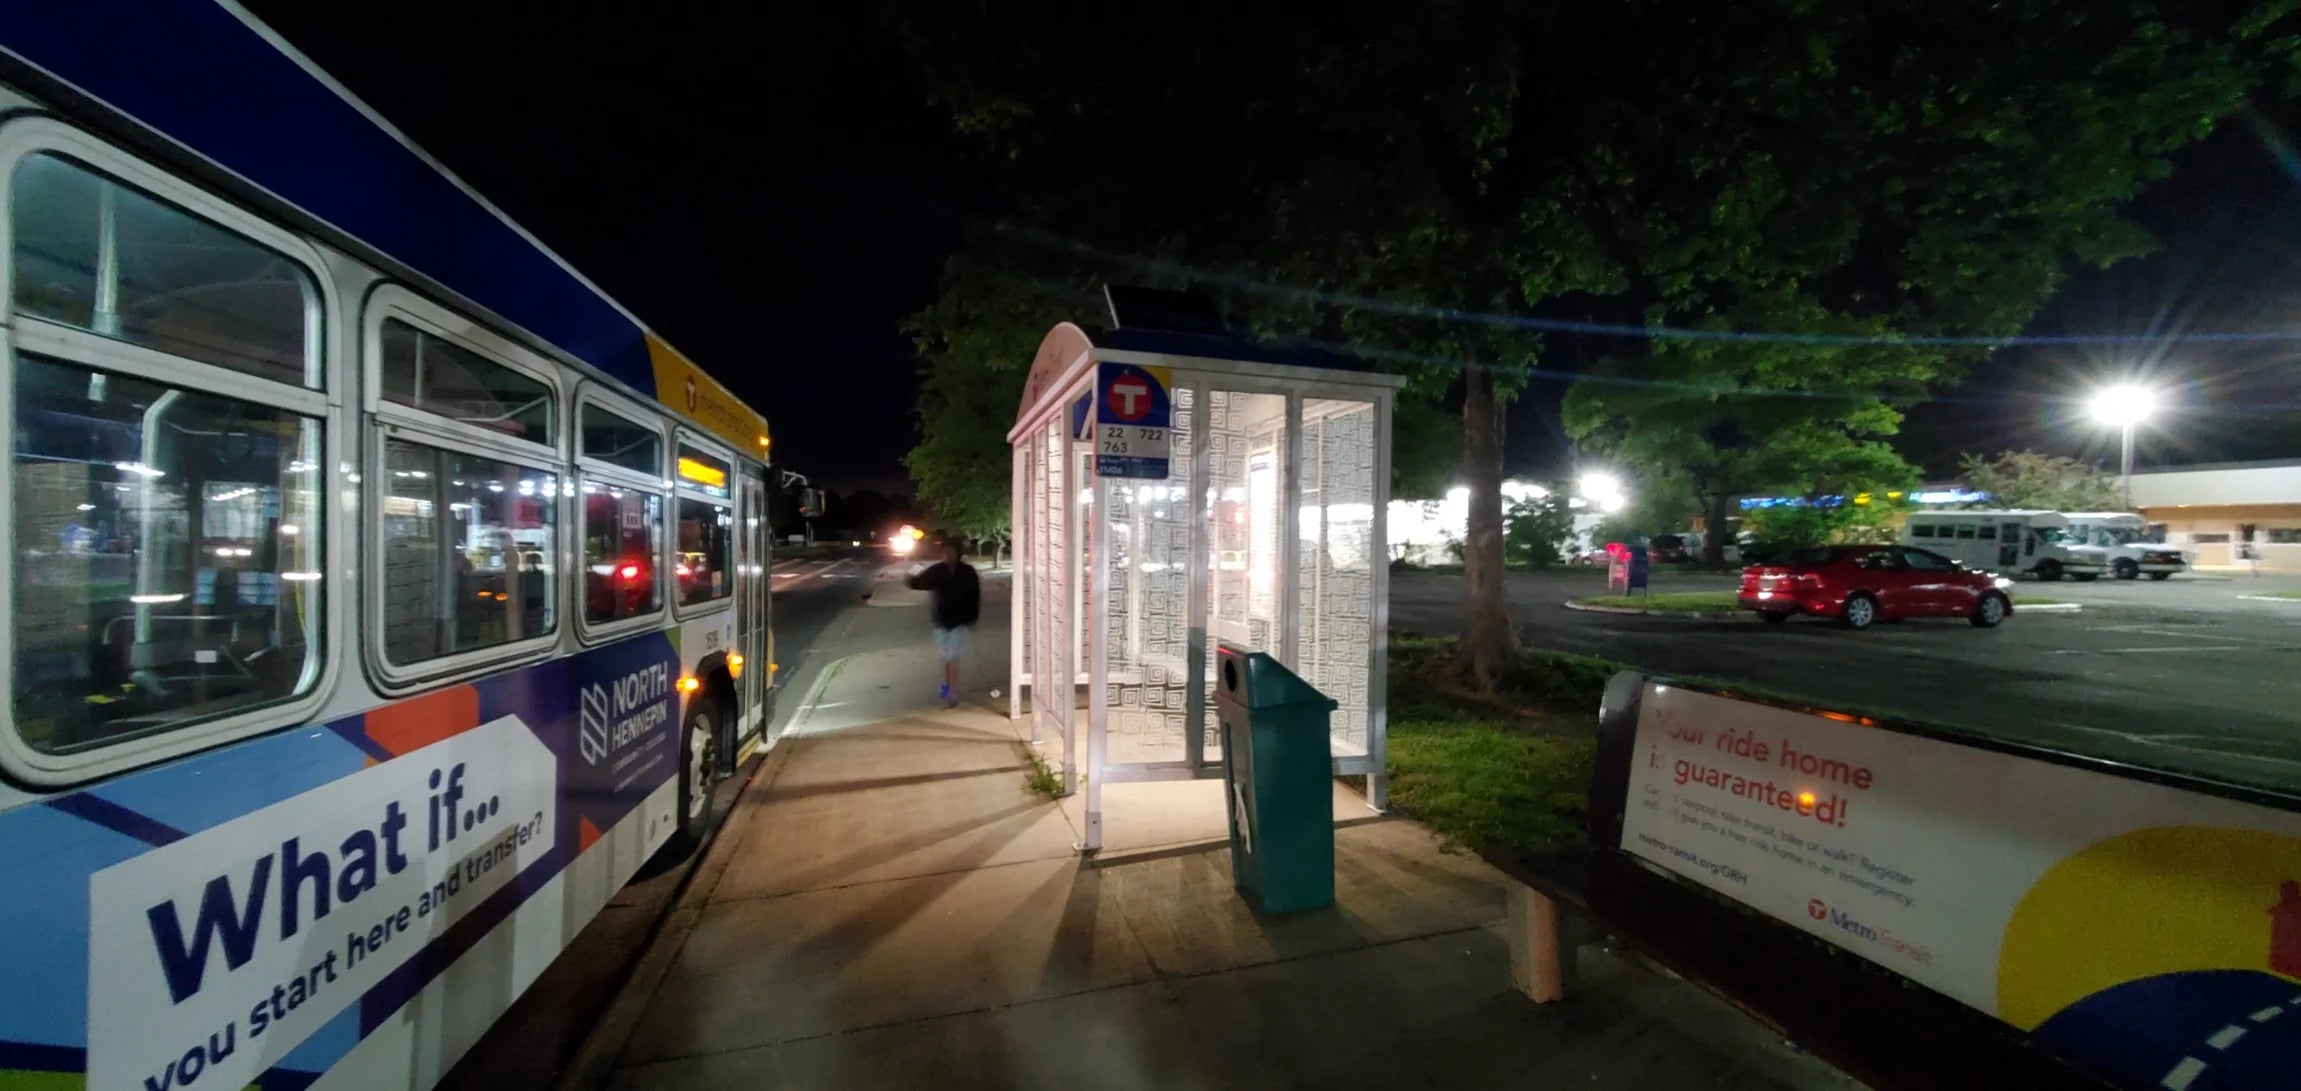 Solar-powered bus shelter in Minneapolis